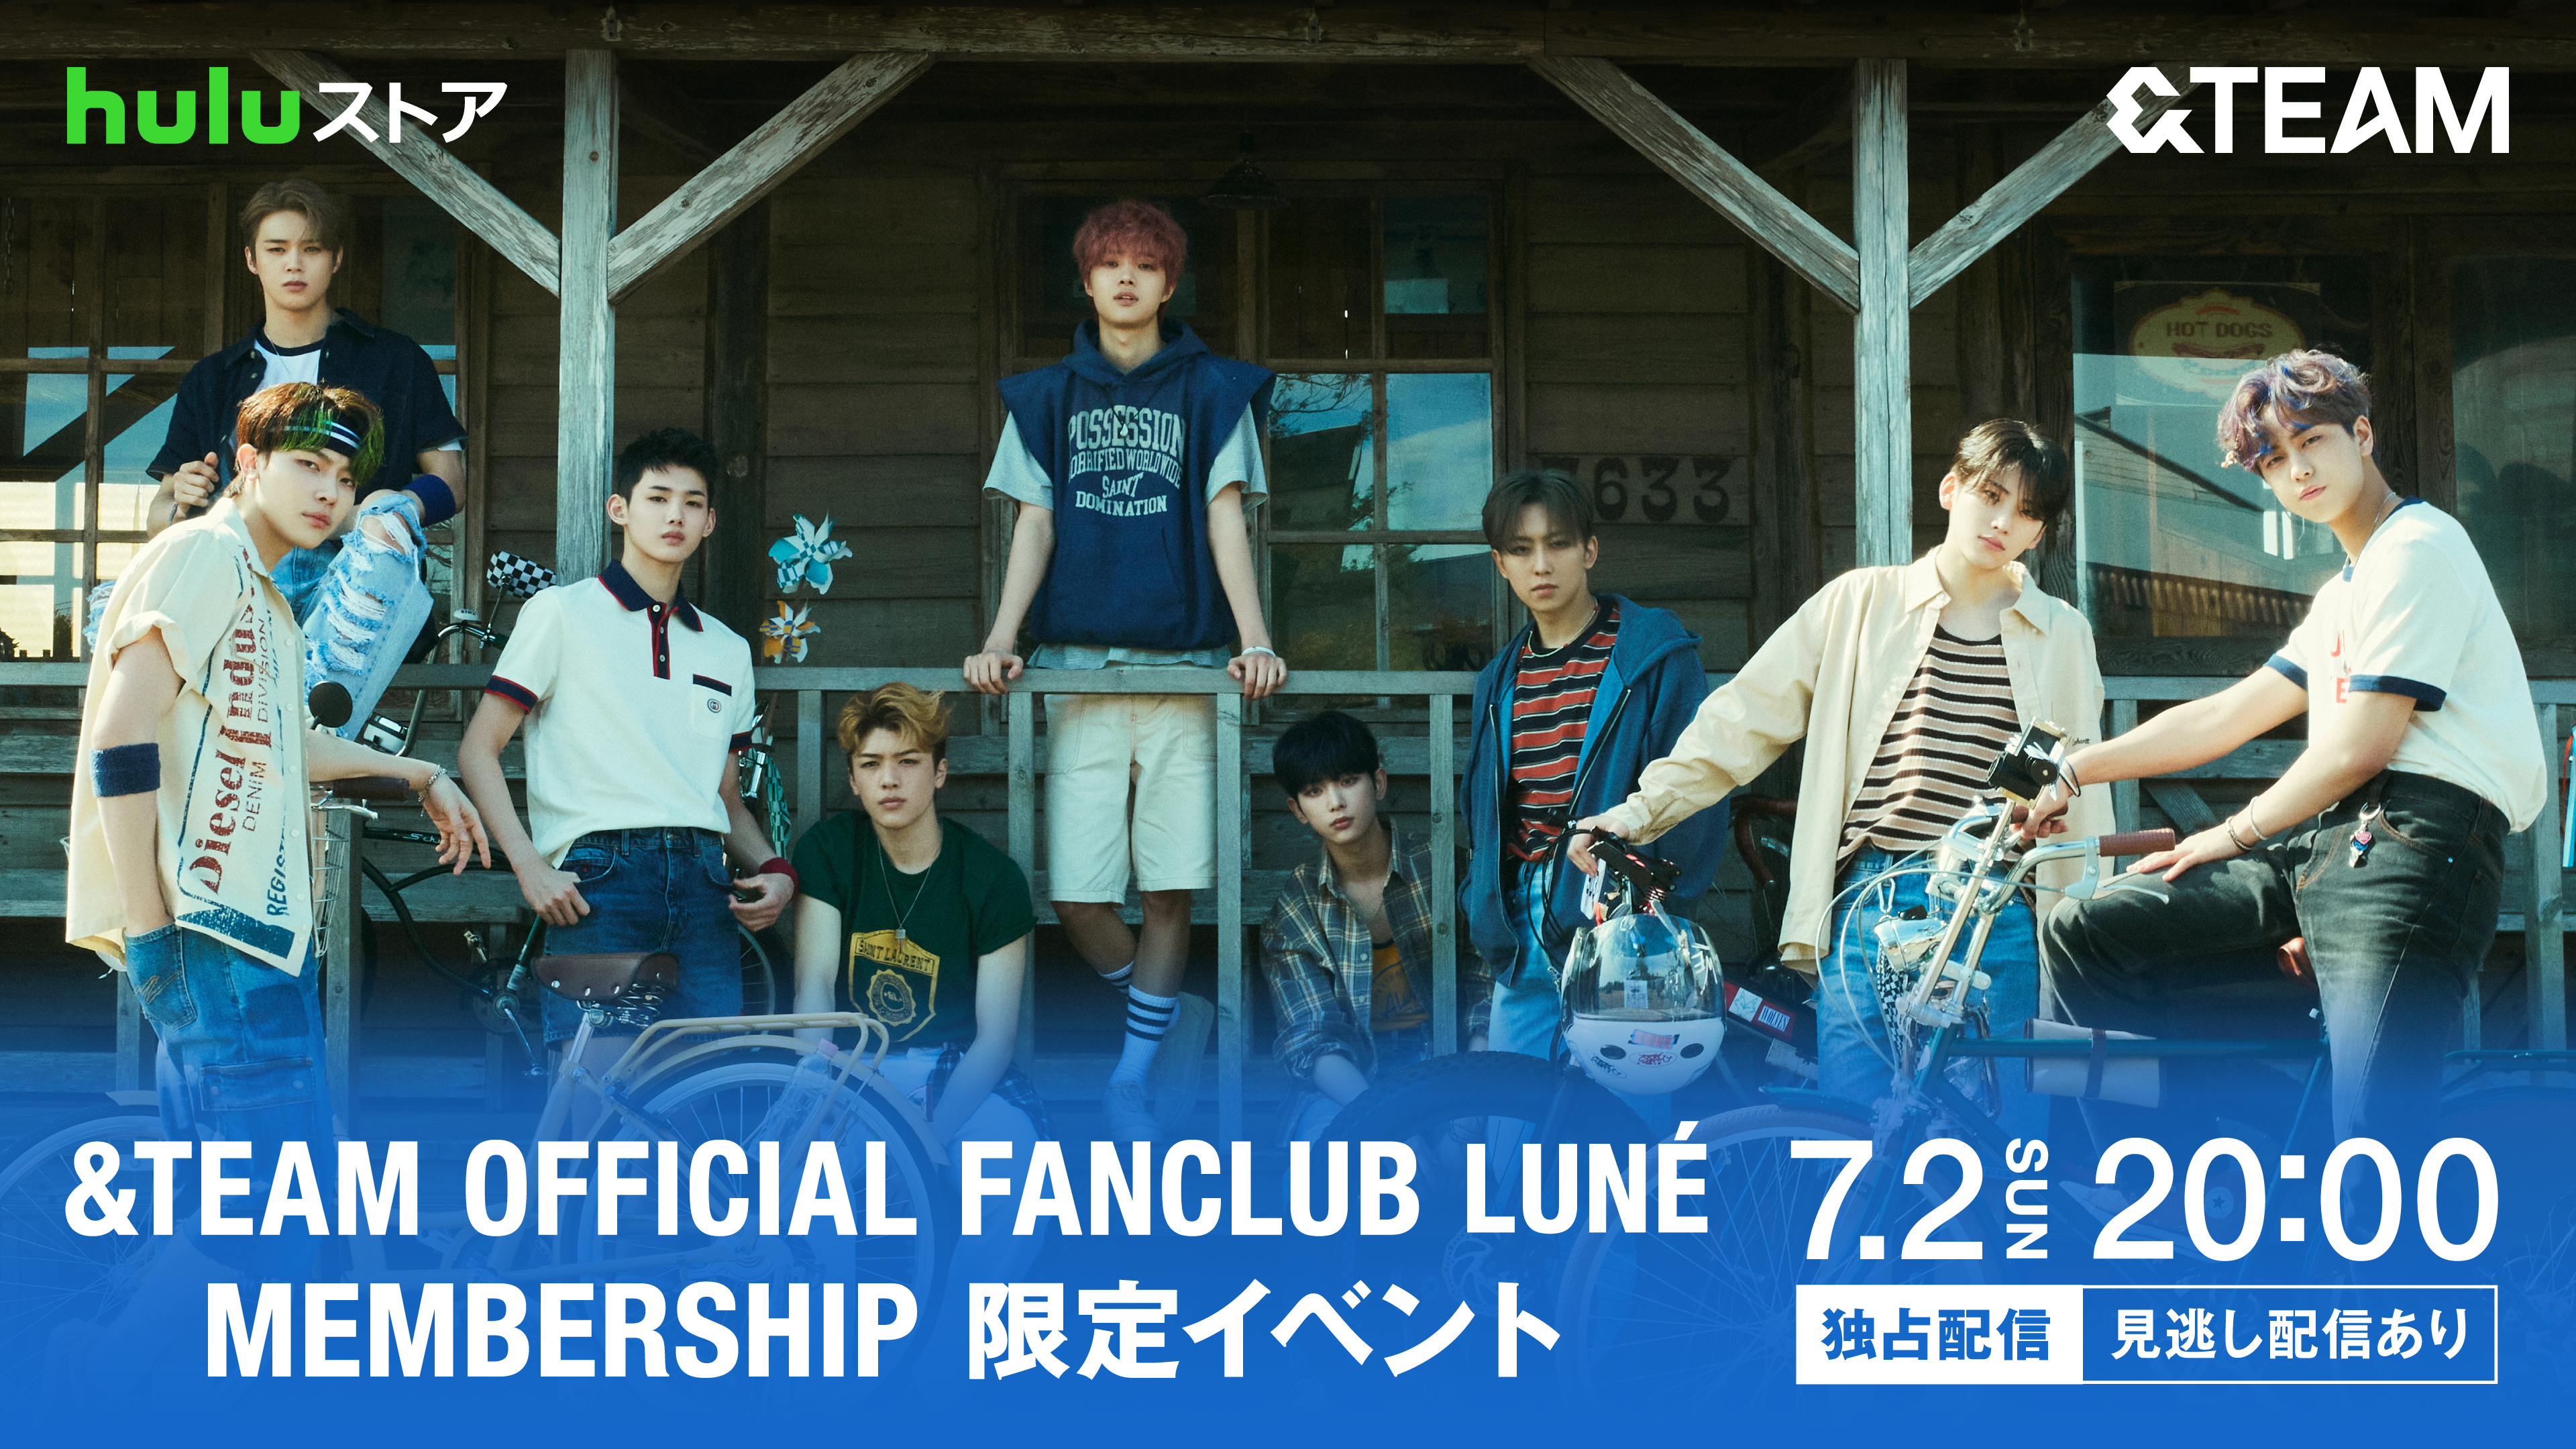 &TEAM OFFICIAL FANCLUB LUN MEMBERSHIP 限定イベント  HYBE LABELS JAPAN / HYBE JAPAN. All Rights Reser